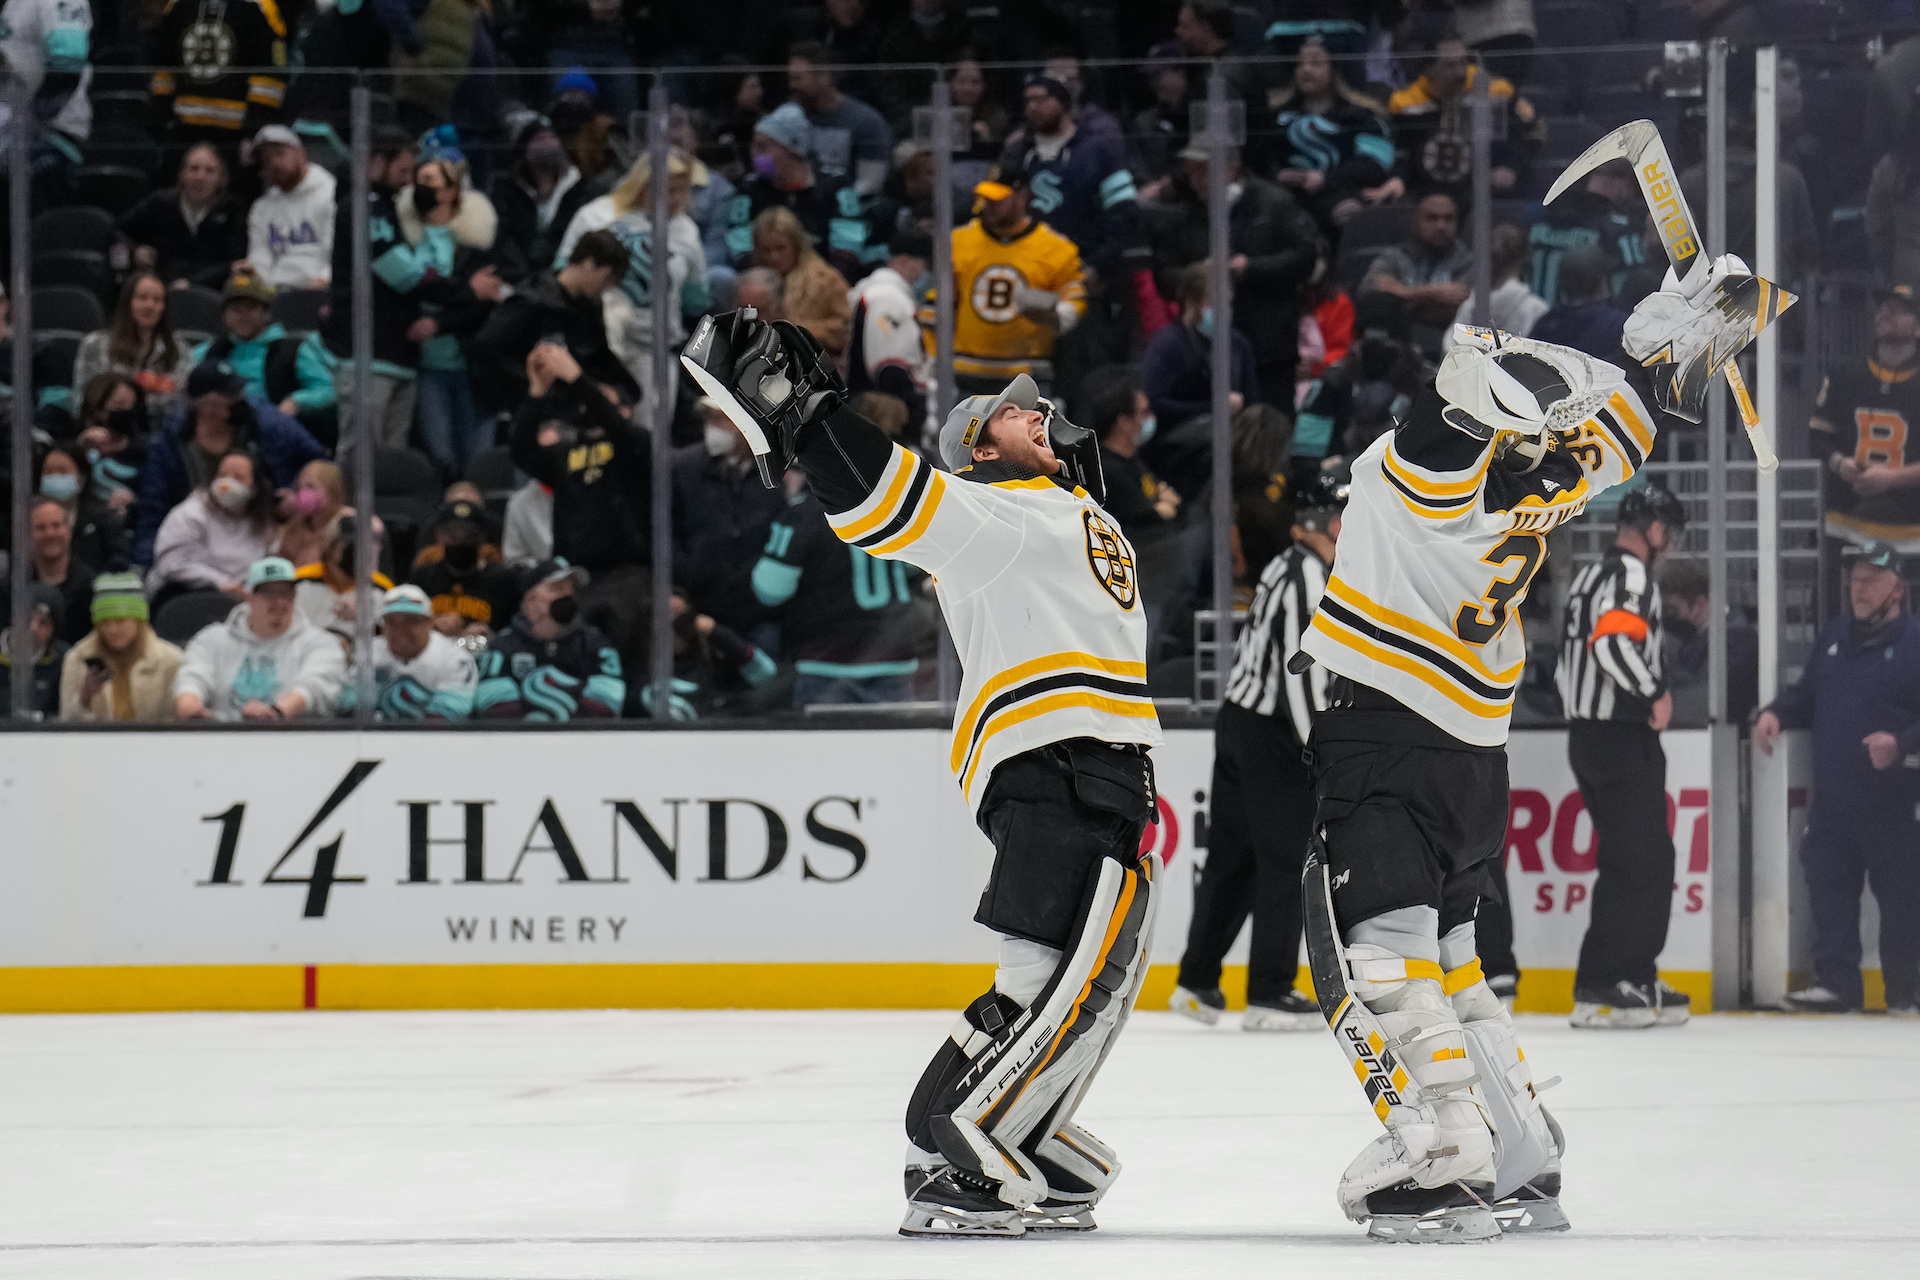 Boston Bruins Can Survive in Net by Relying on Ullmark/Swayman Duo